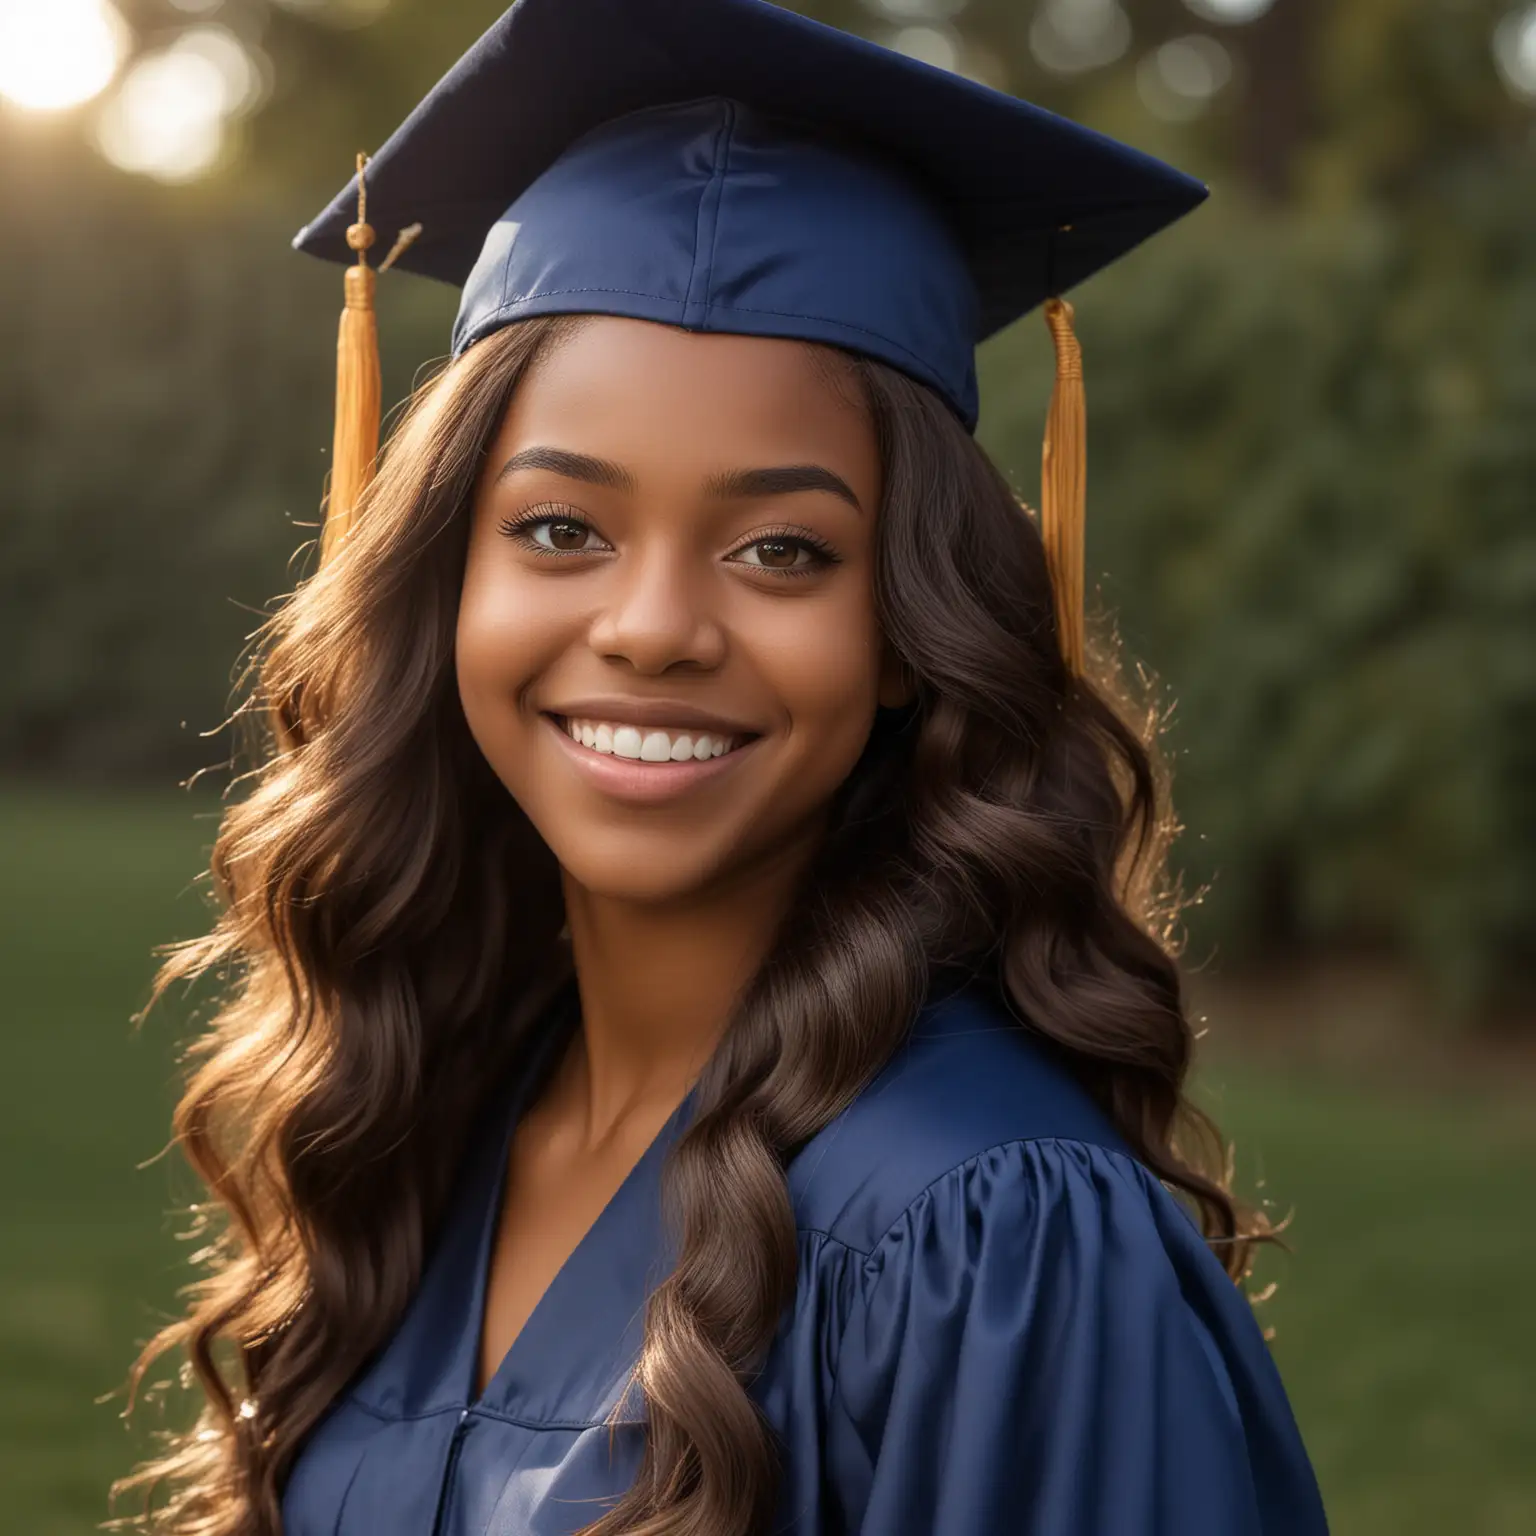 A photo session featuring an 18-year-old black female with a radiant smile, sporting long, golden-brown, loose, body wave hairstyle and hazel eyes. She has a dark skin complexion and is celebrating her high school graduation. She's dressed in a dark blue graduation cap and gown, posing outdoors under natural lighting from various front angles.